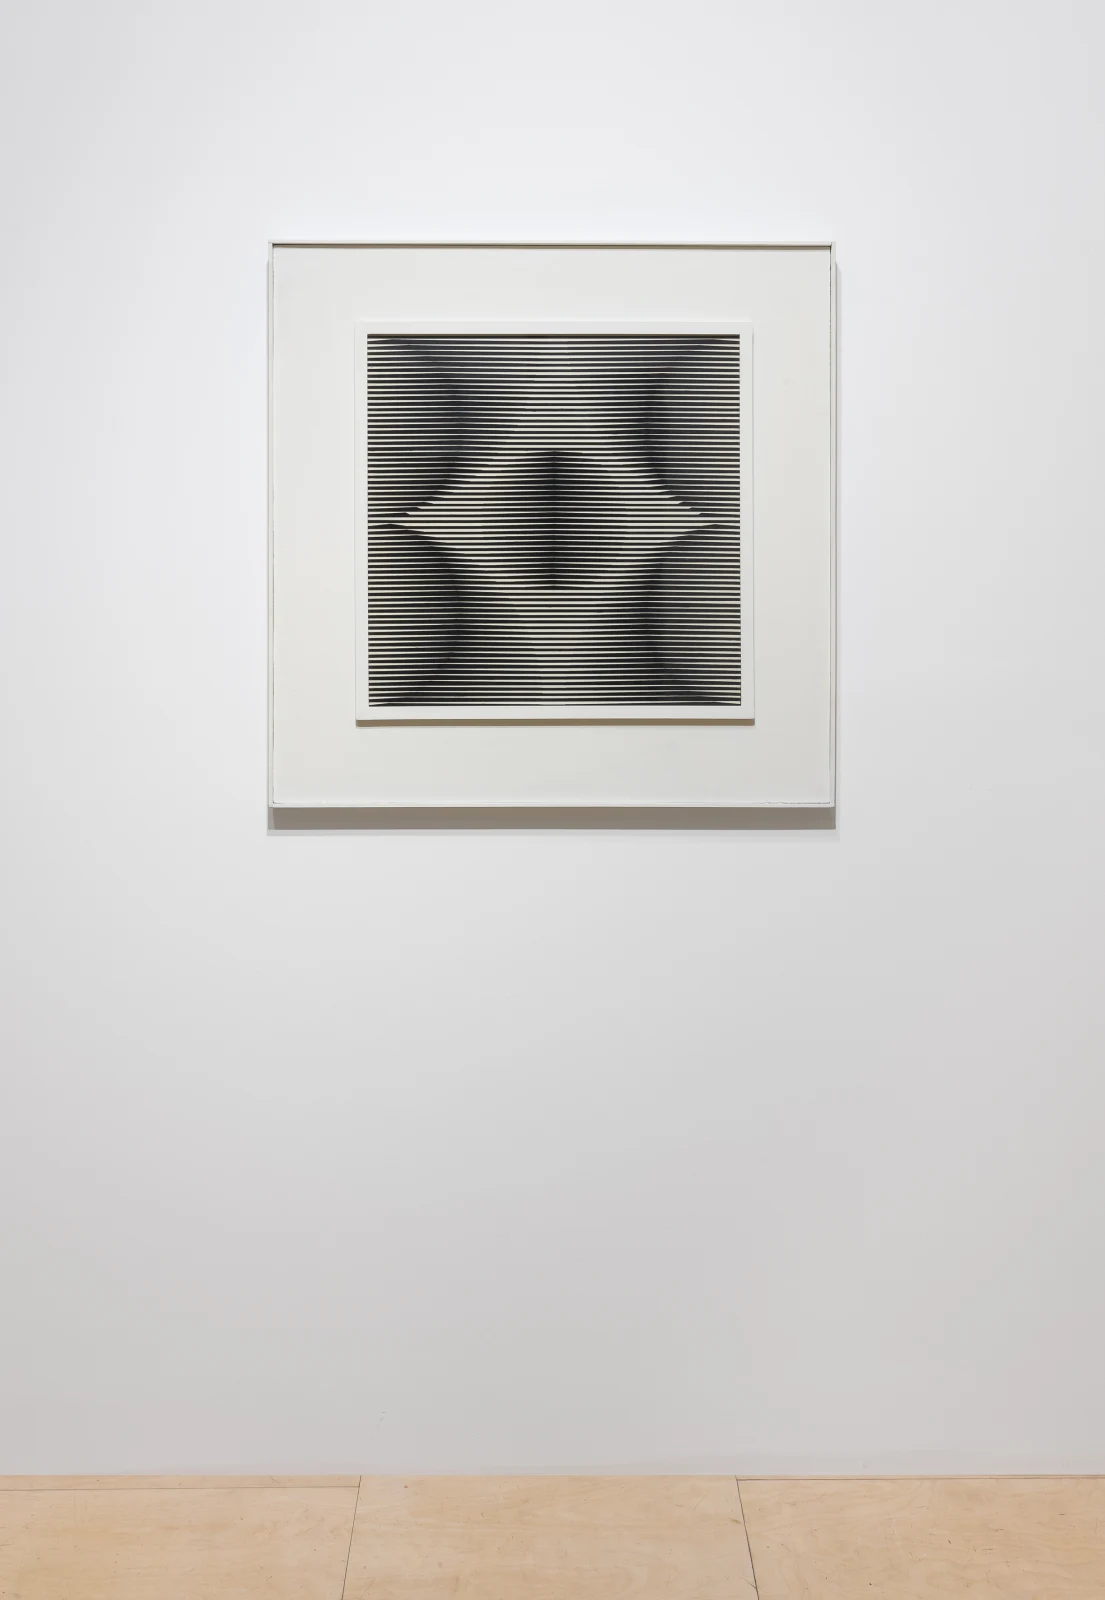 Manuel Espinosa: Black and White | Works on Paper from the 1970s ...